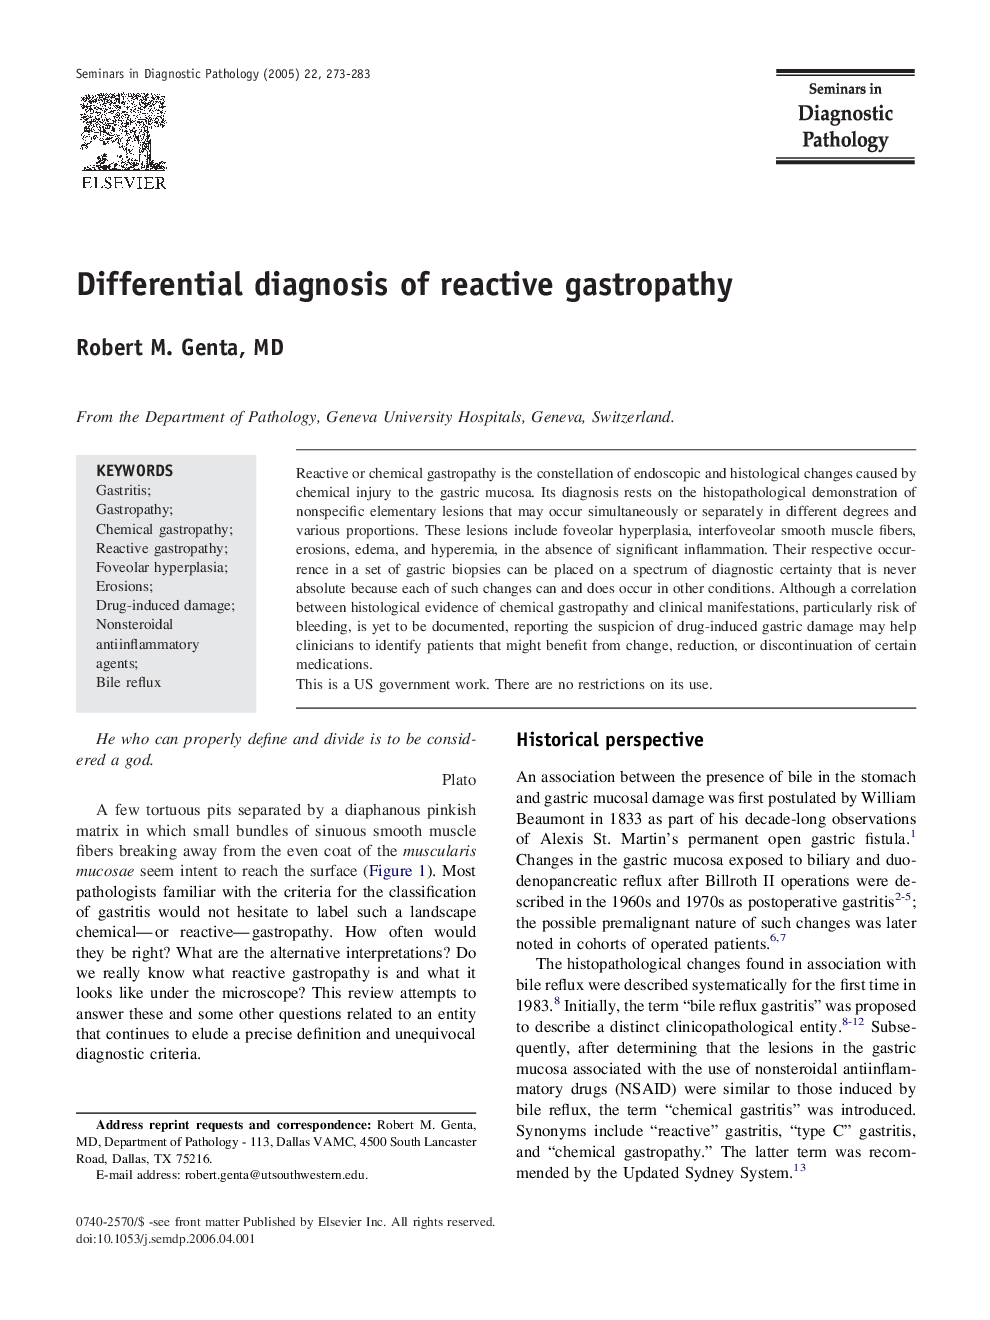 Differential diagnosis of reactive gastropathy